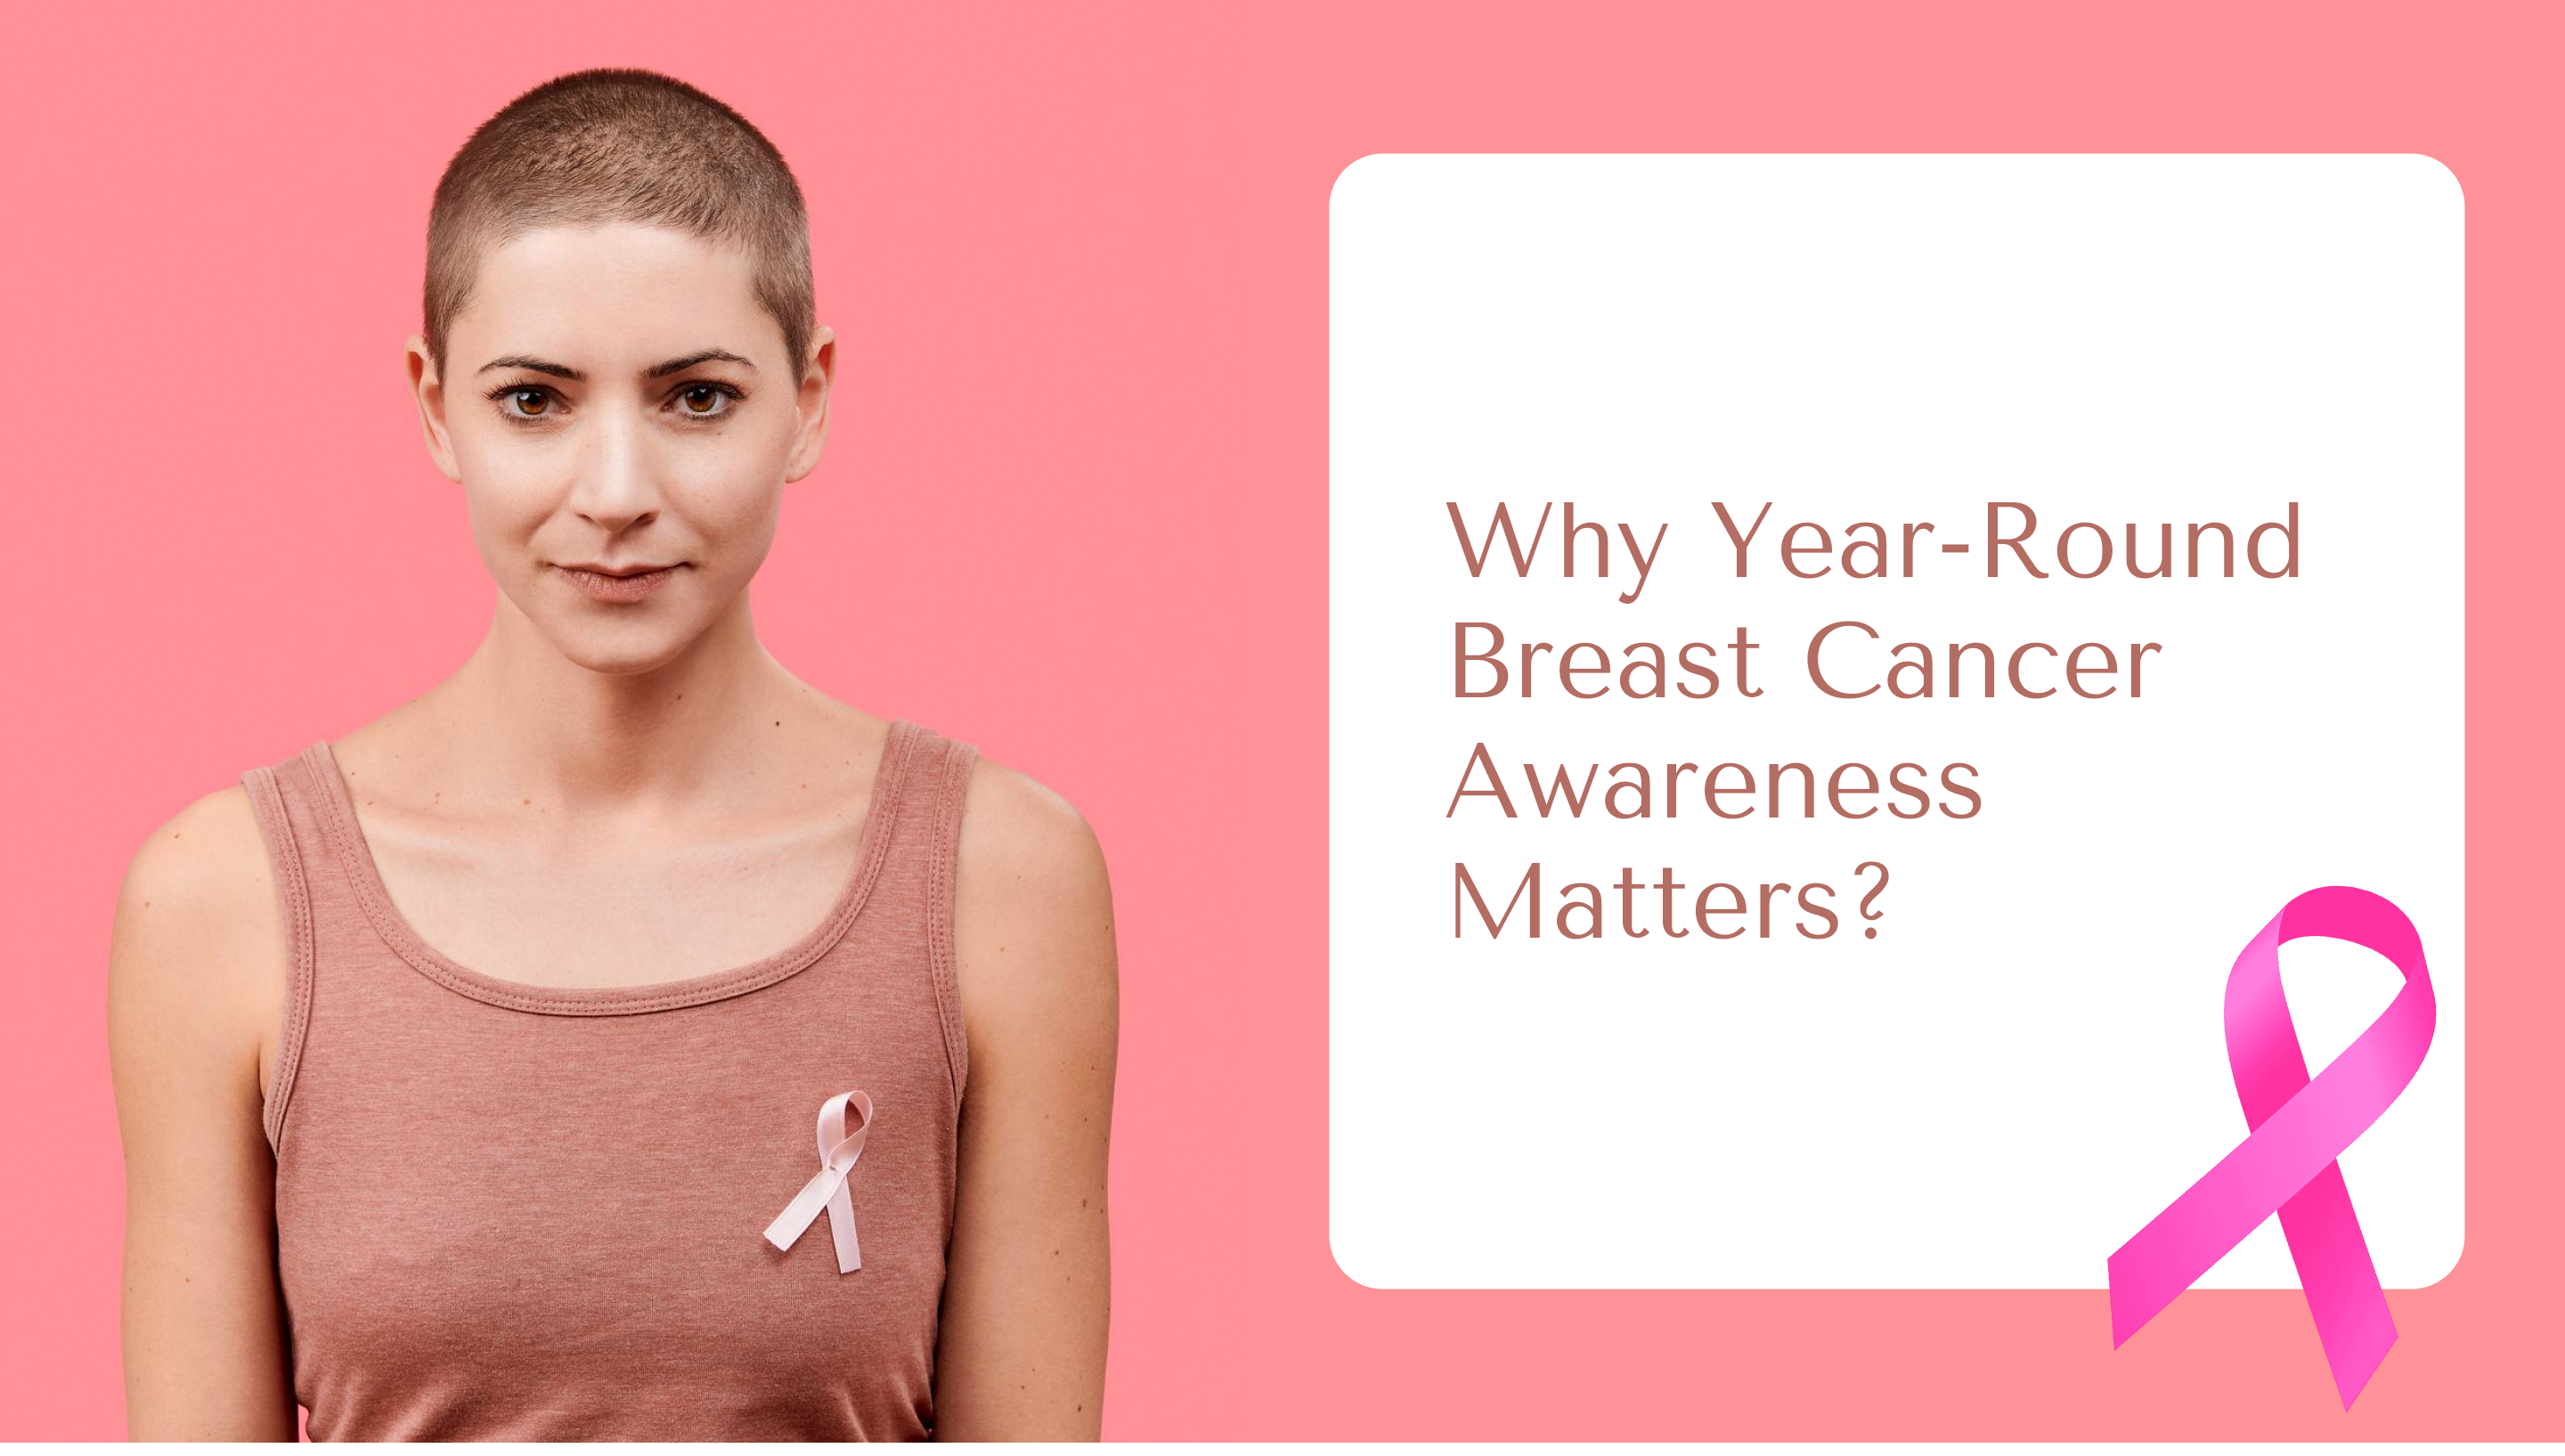 Why Year-Round Breast Cancer Awareness Matters?